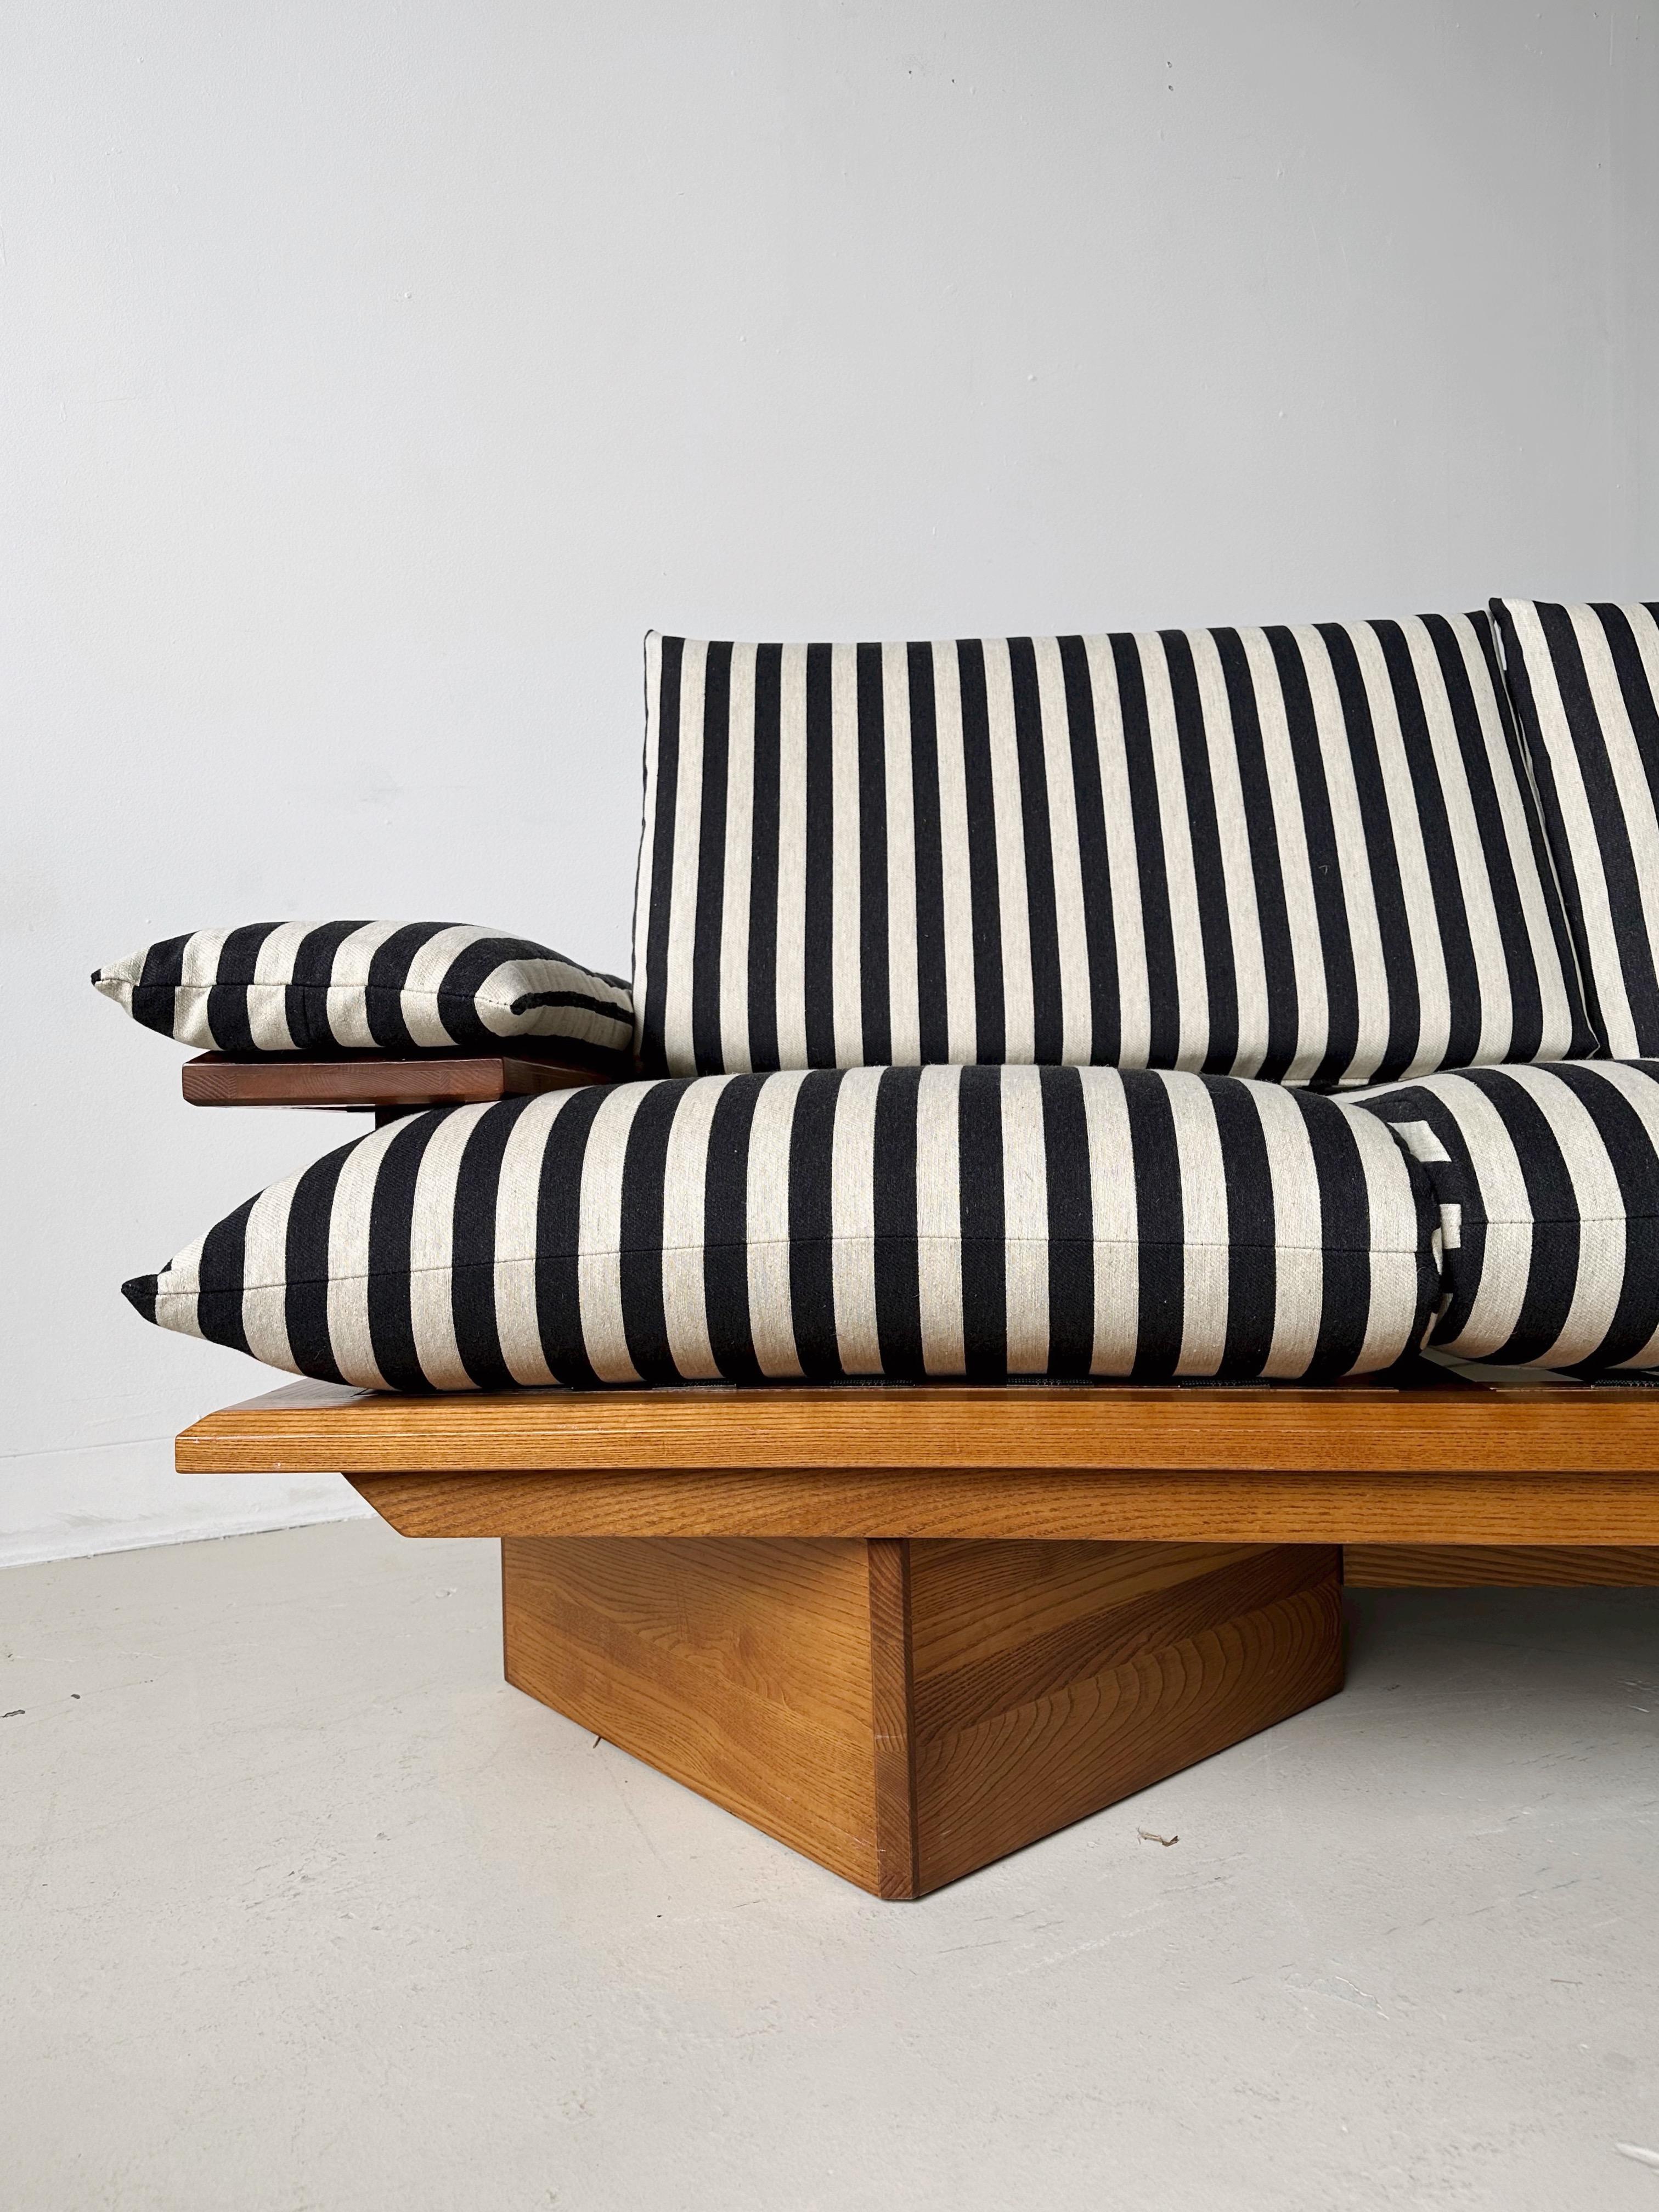 Pine Striped 3 Seater Sofa

Reupholstered with heavy duty midnight & off white fabric. Exceeds 100,000 double rubs, 60% Cotton, 30% Polyester, 10% Flax. Made in America. Not suitable for outdoors.

//  

Dimensions:
81”W x 34”D x 32”H - seat height